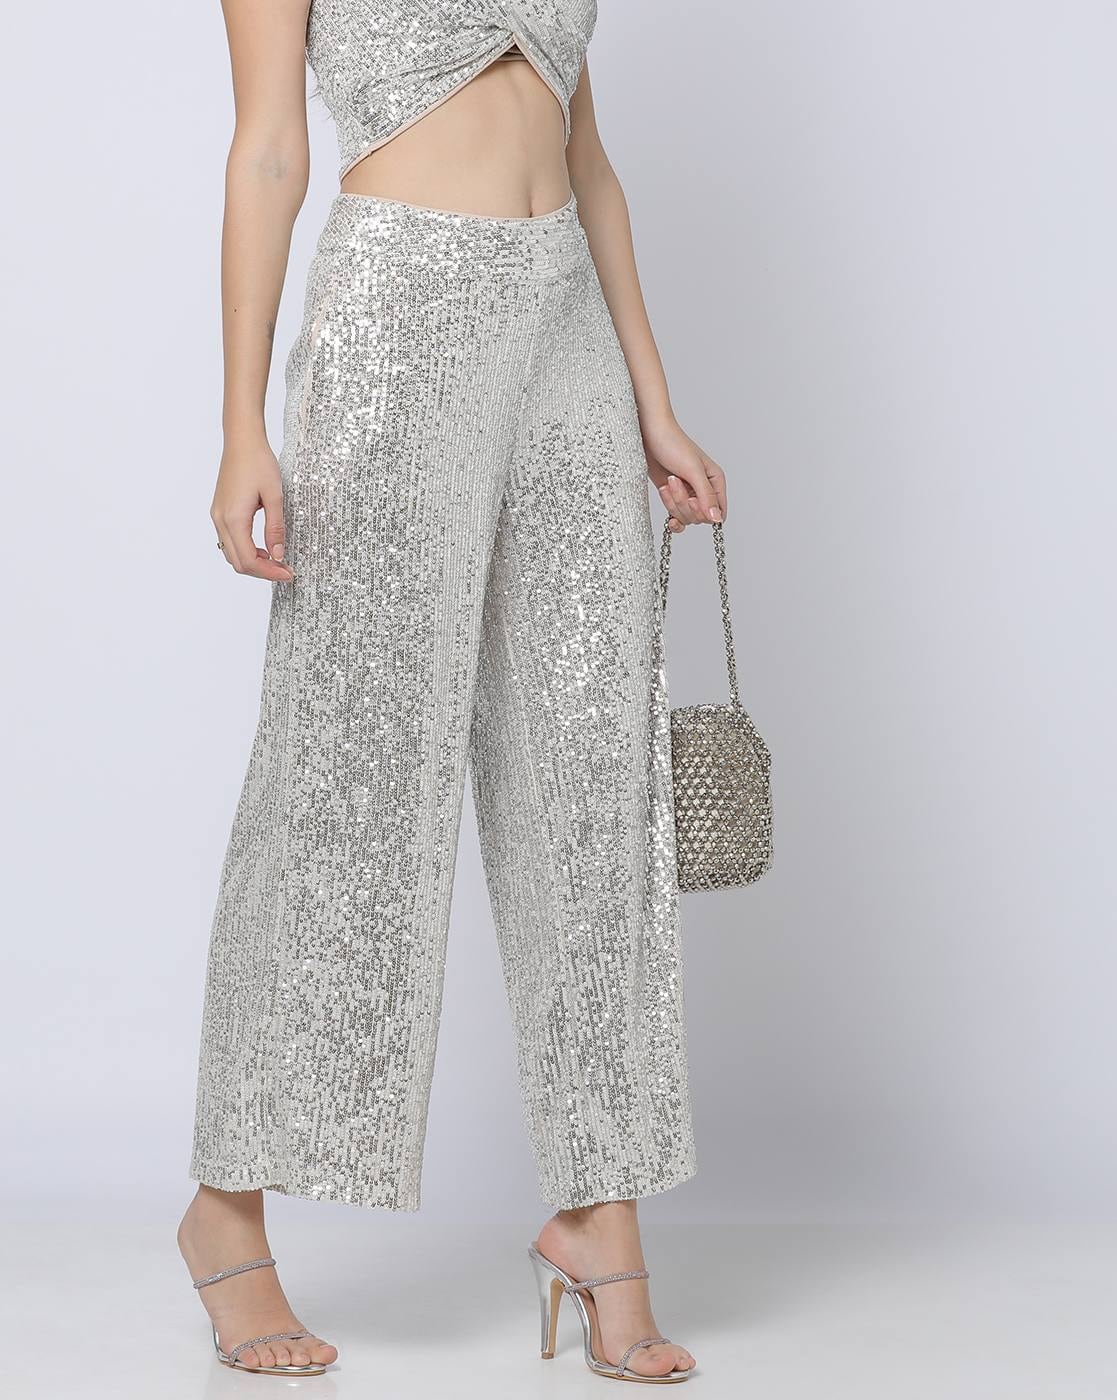 Sequin Embellished Pants for New Year's Eve! - Haute Off The Rack